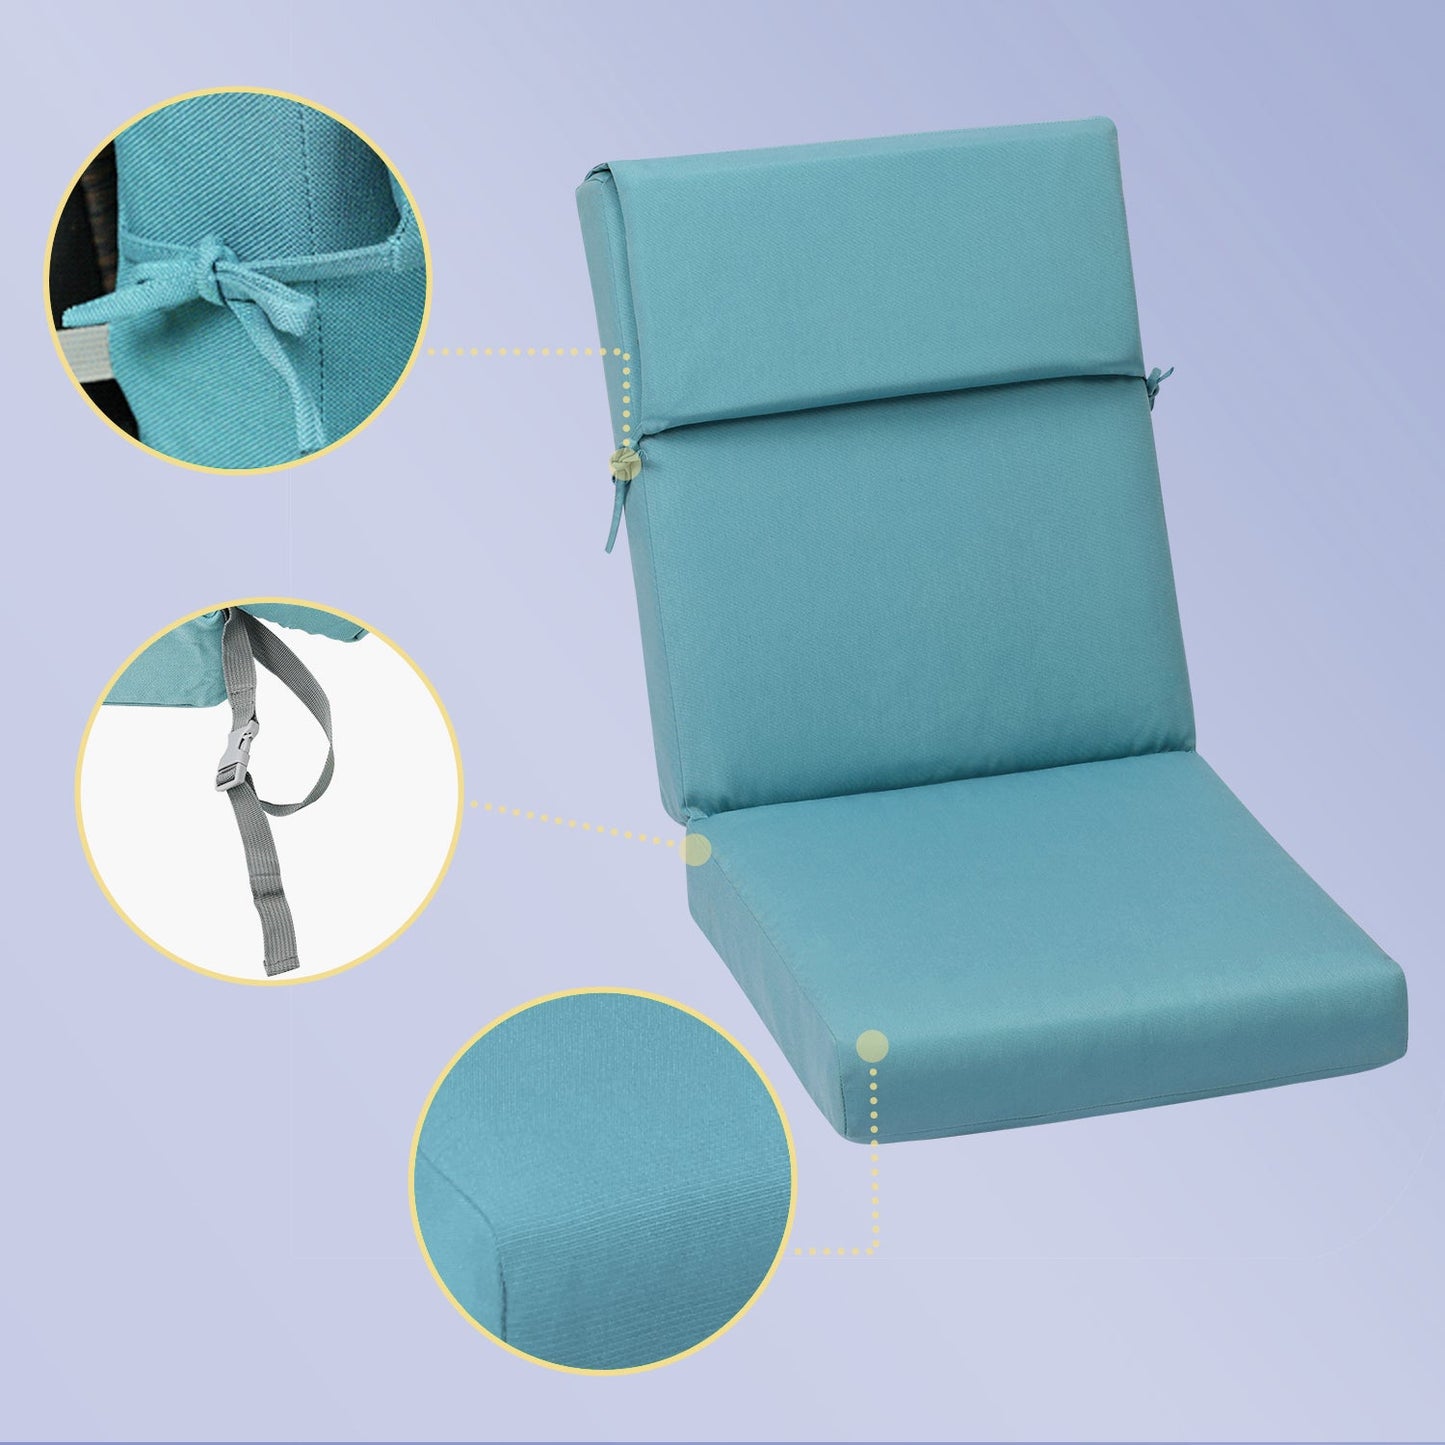 High Back Chair Cushions Set of 4, UV-Protected & Water-Resistant, 46x21x4 Inches CUSHION Aoodor   